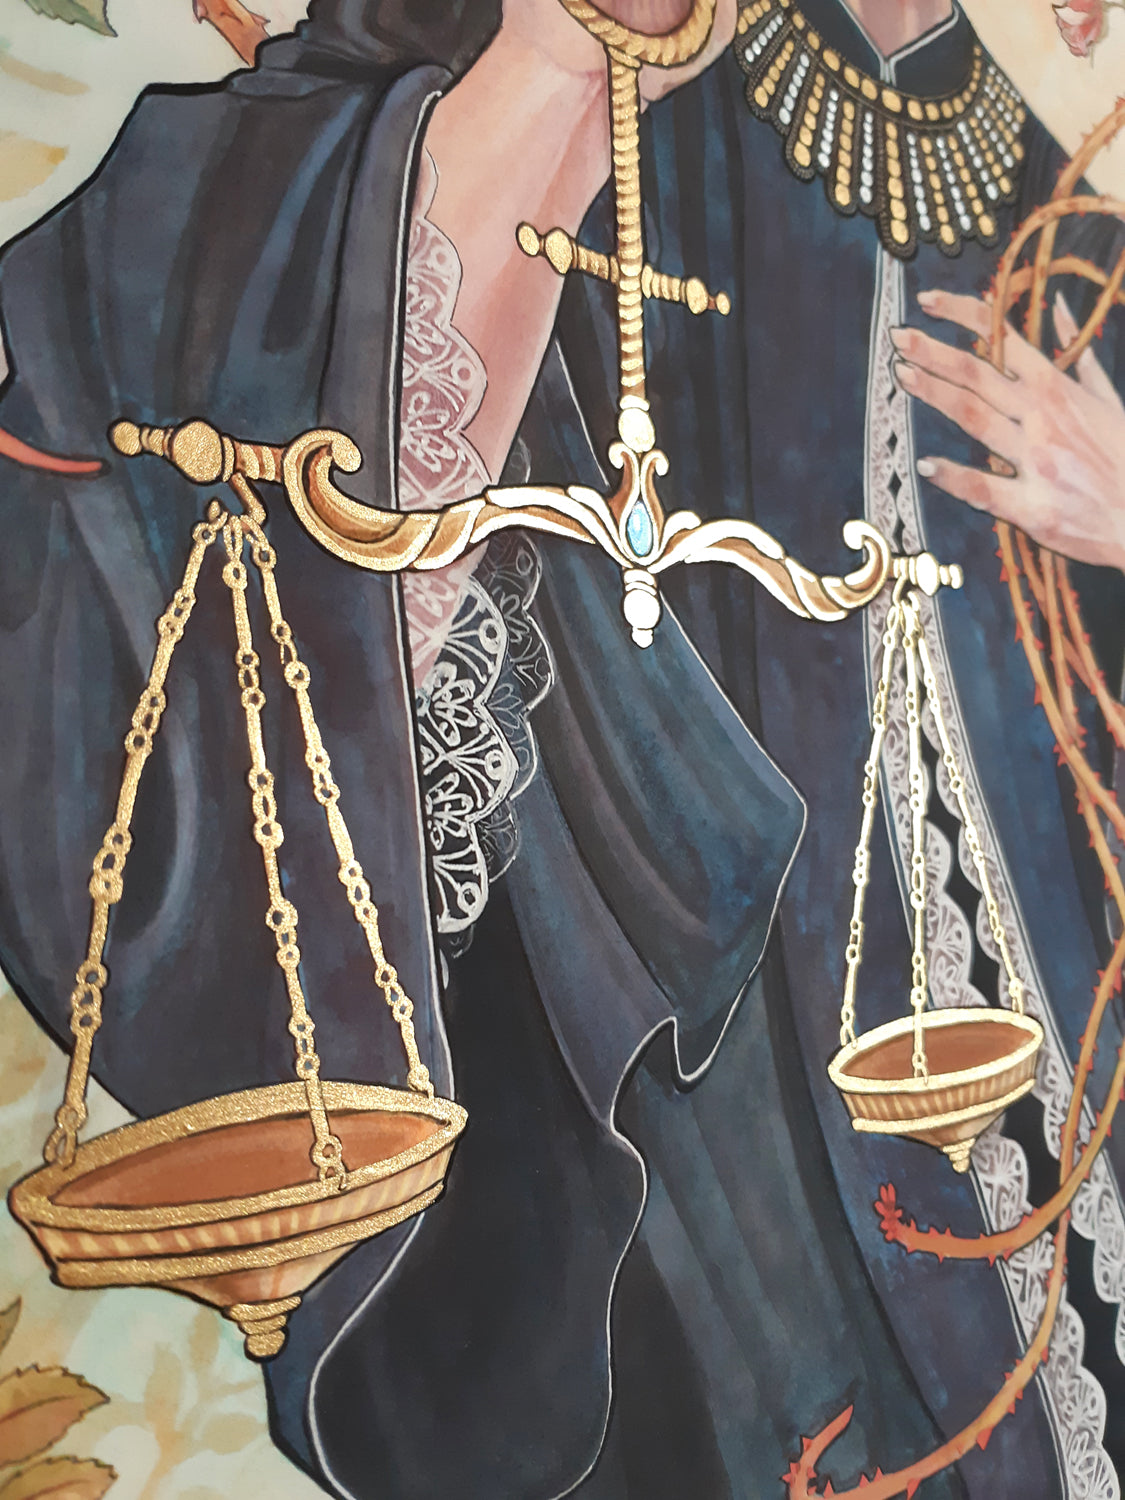 SPECIAL LIMITED GICLEE PRINT EDITION: The Notorious Justice